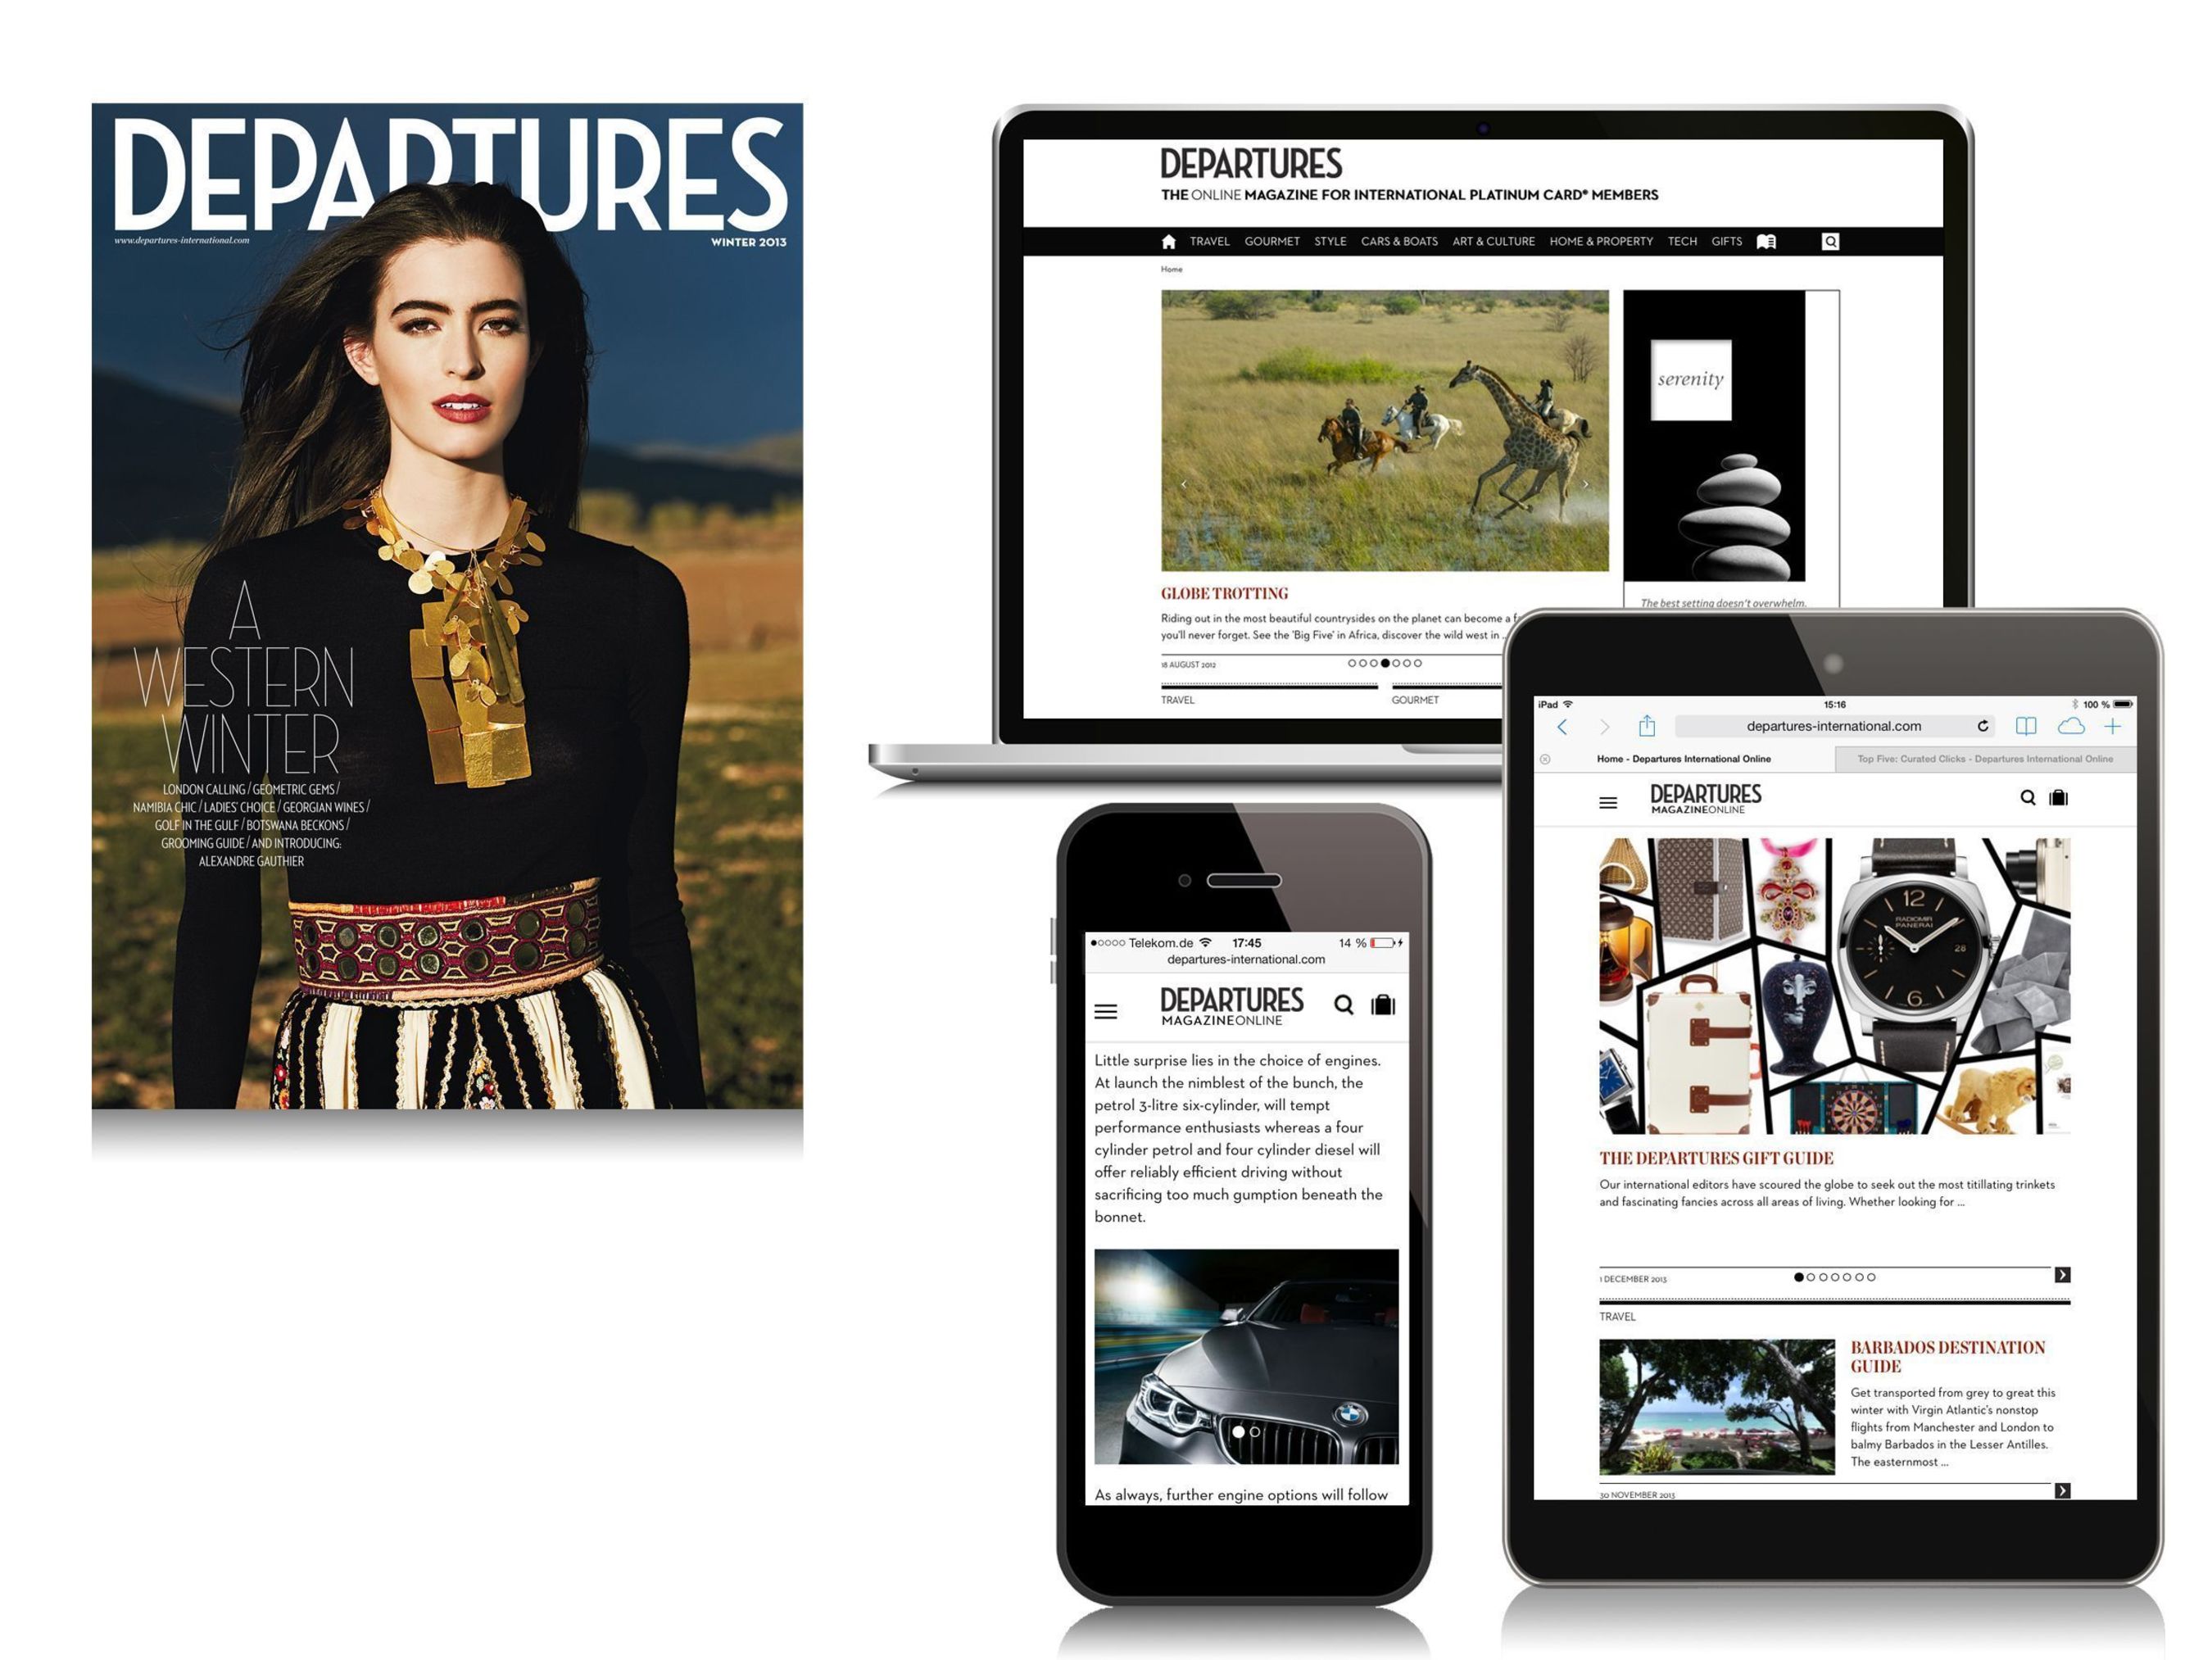 Departures Magazine Online for Platinum Card Members from American Express. Relaunch provides a whole new online experience and elevates the site to the ranks of the worldâ€™s most influential sources of luxury news, views and inspiration. (PRNewsFoto/Journal International)